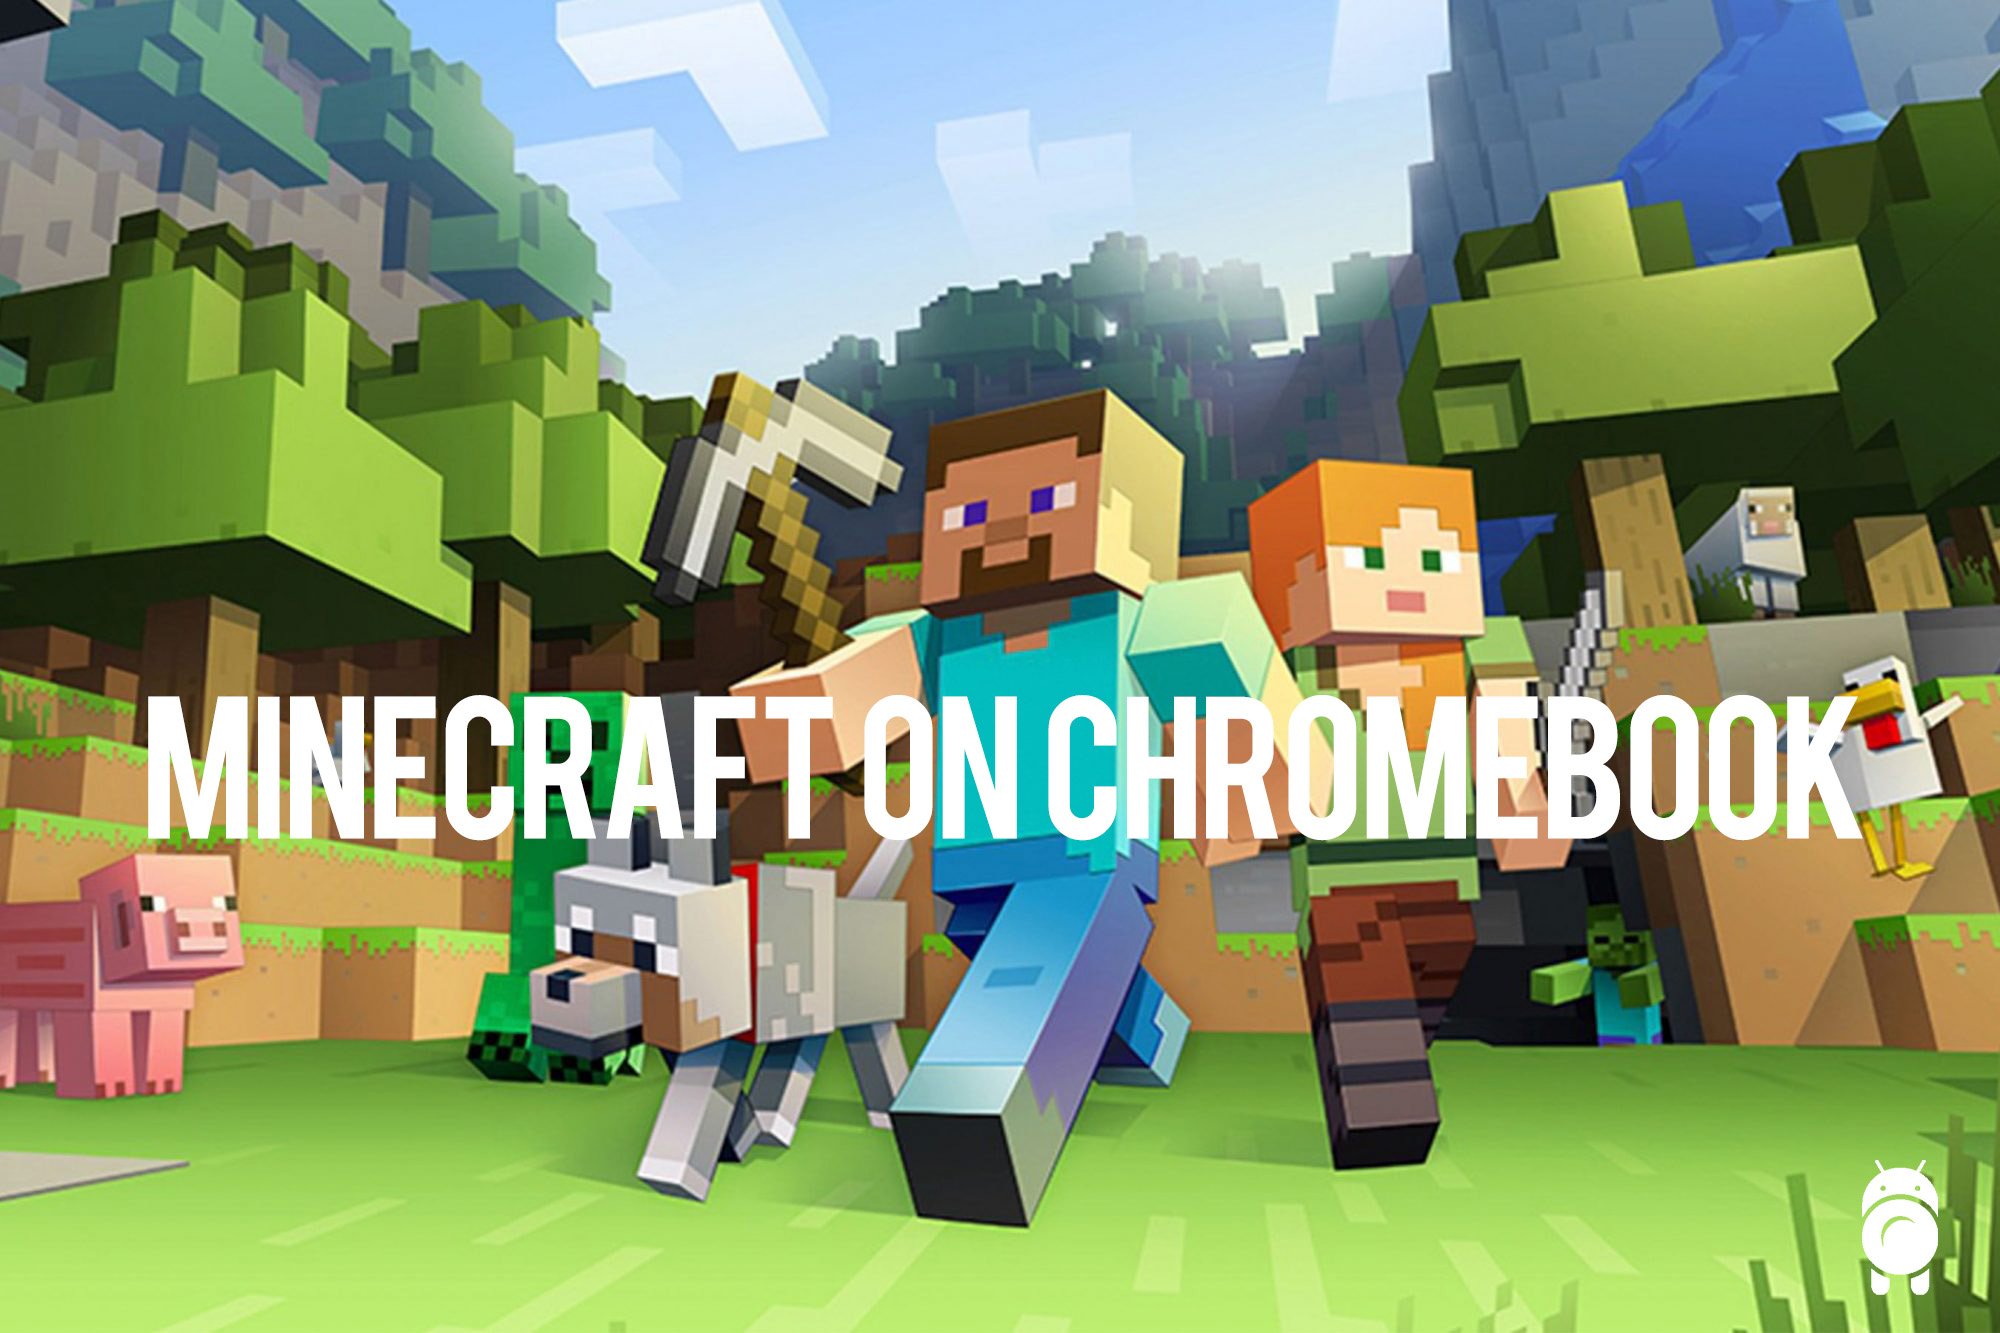 Can You Play Minecraft On Chromebook?